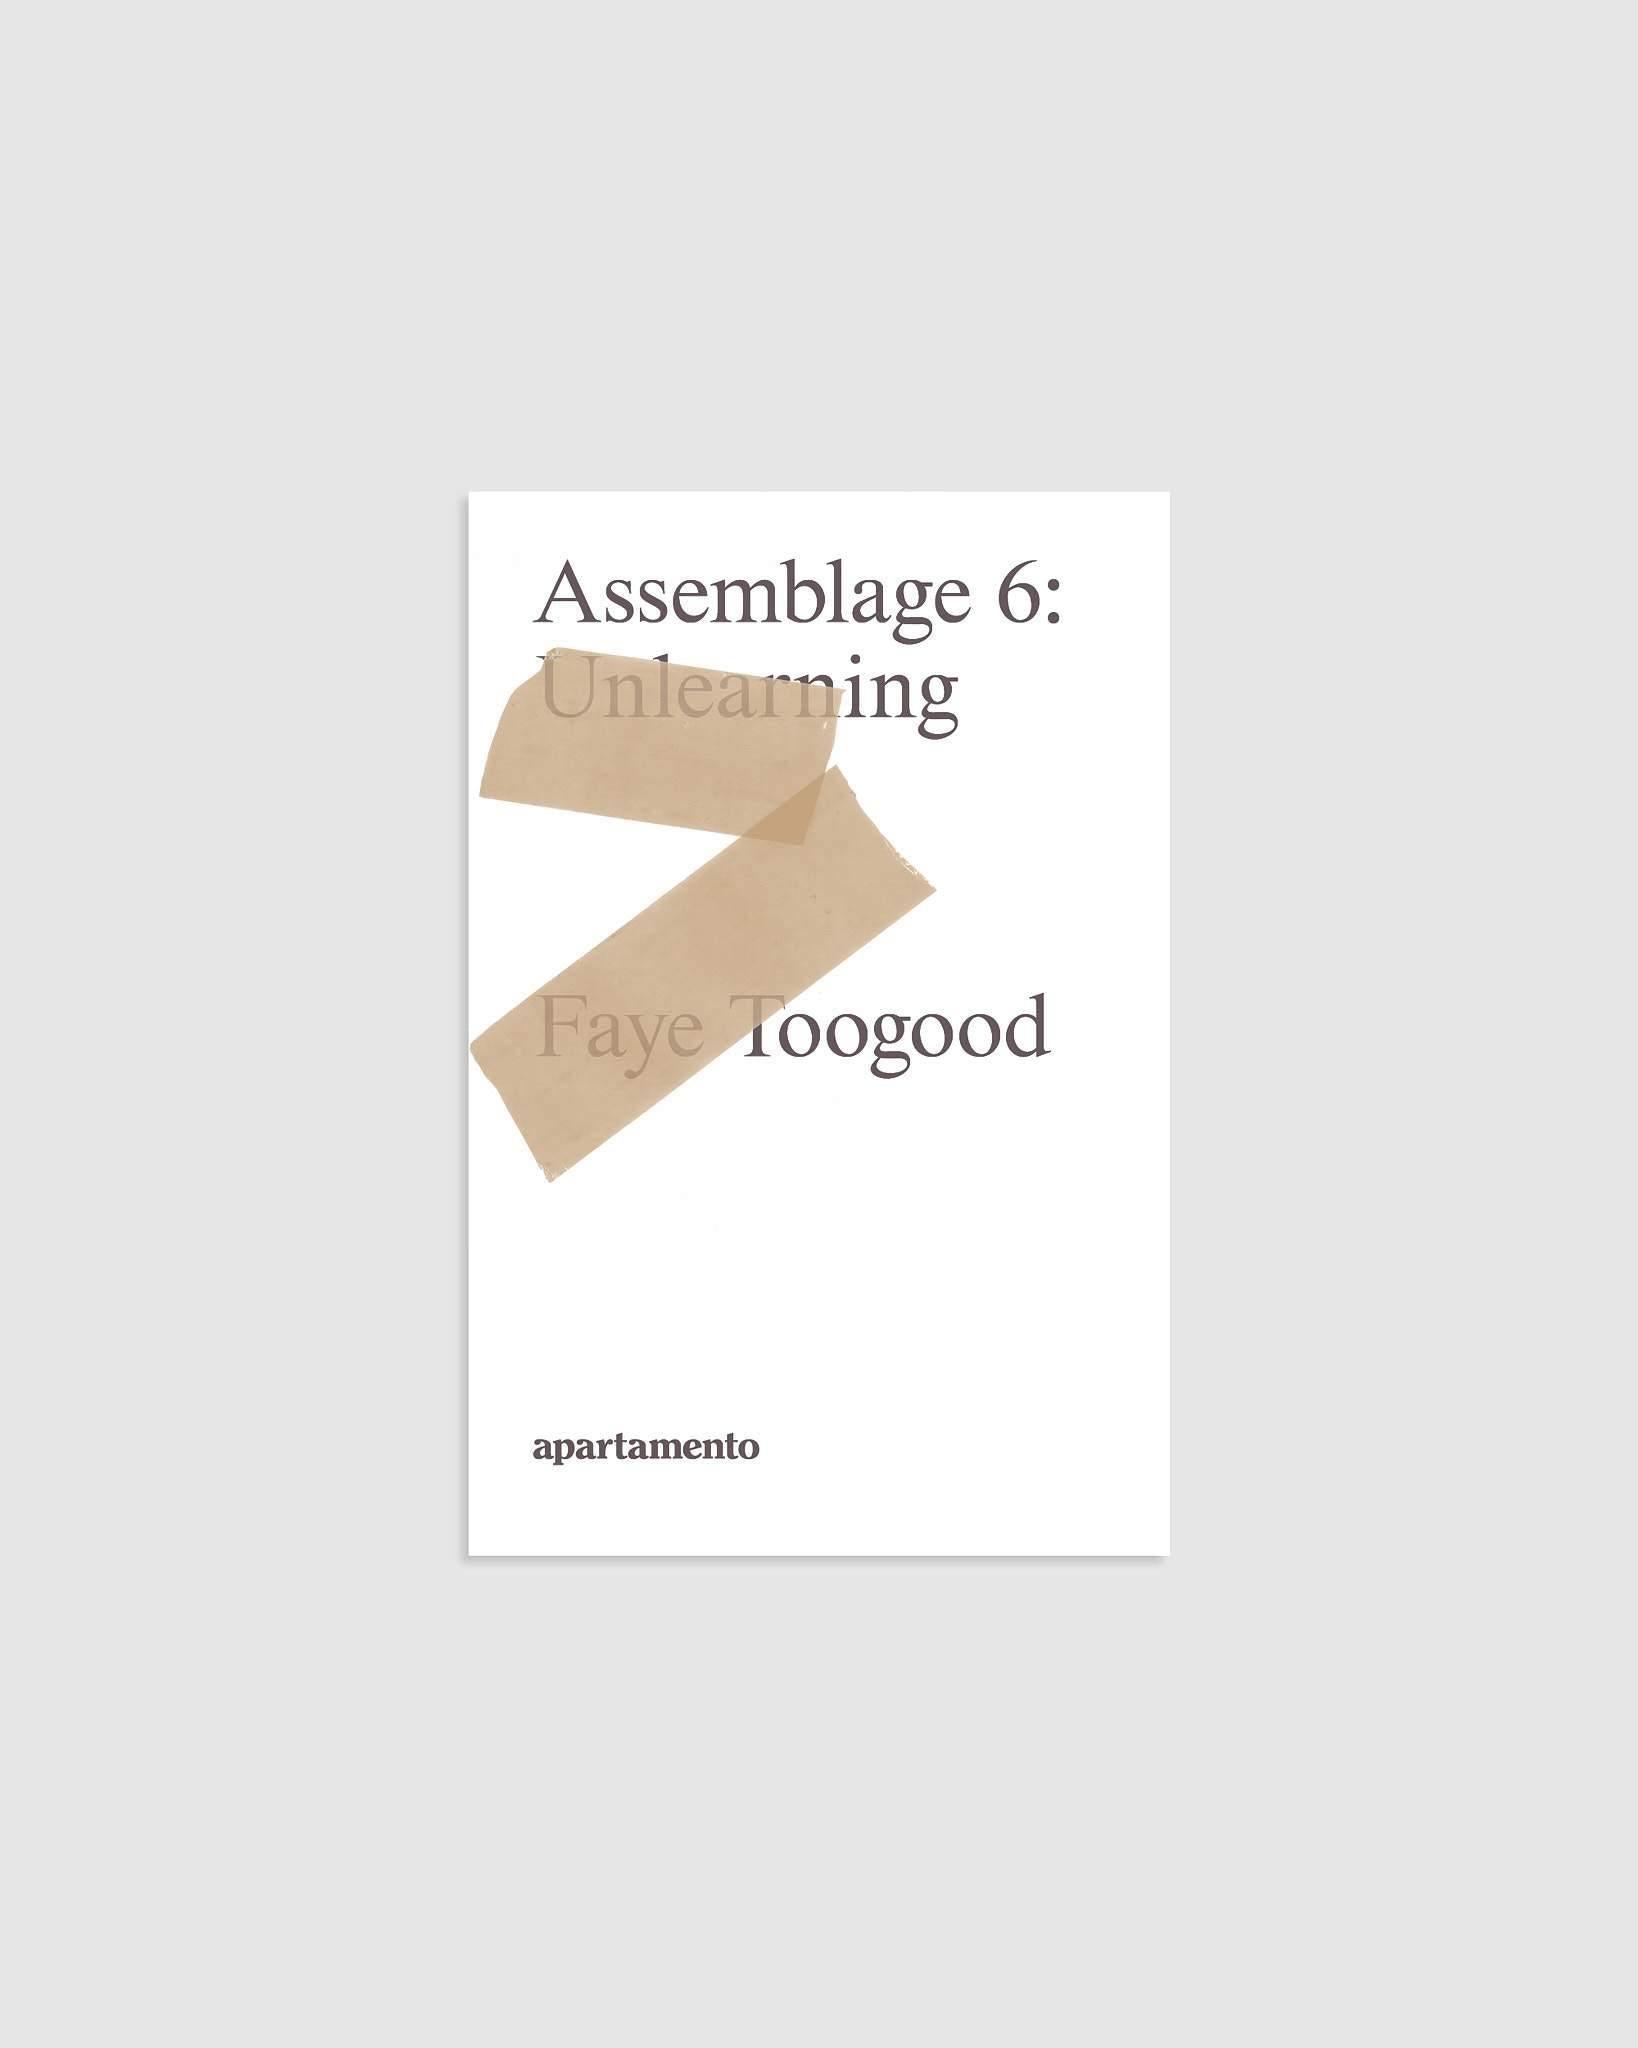 Faye Toogood: Assemblage 6, Unlearning - {{ collection.title }} - Chinatown Country Club 